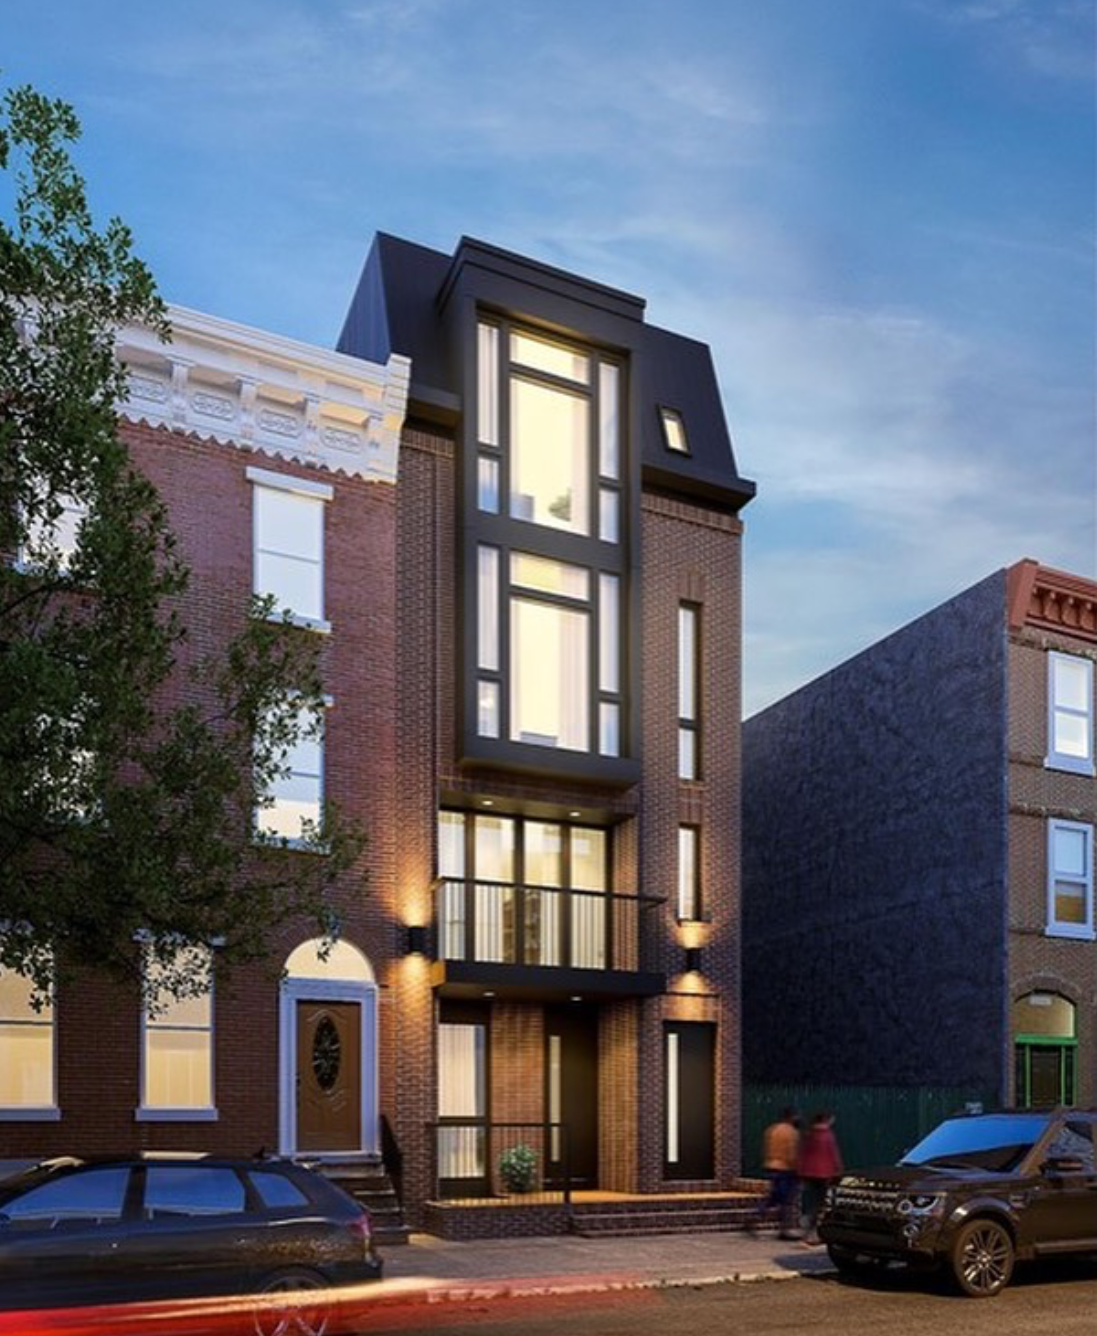 Rendering of 1507 Christian Street. Credit: Gnome Architects